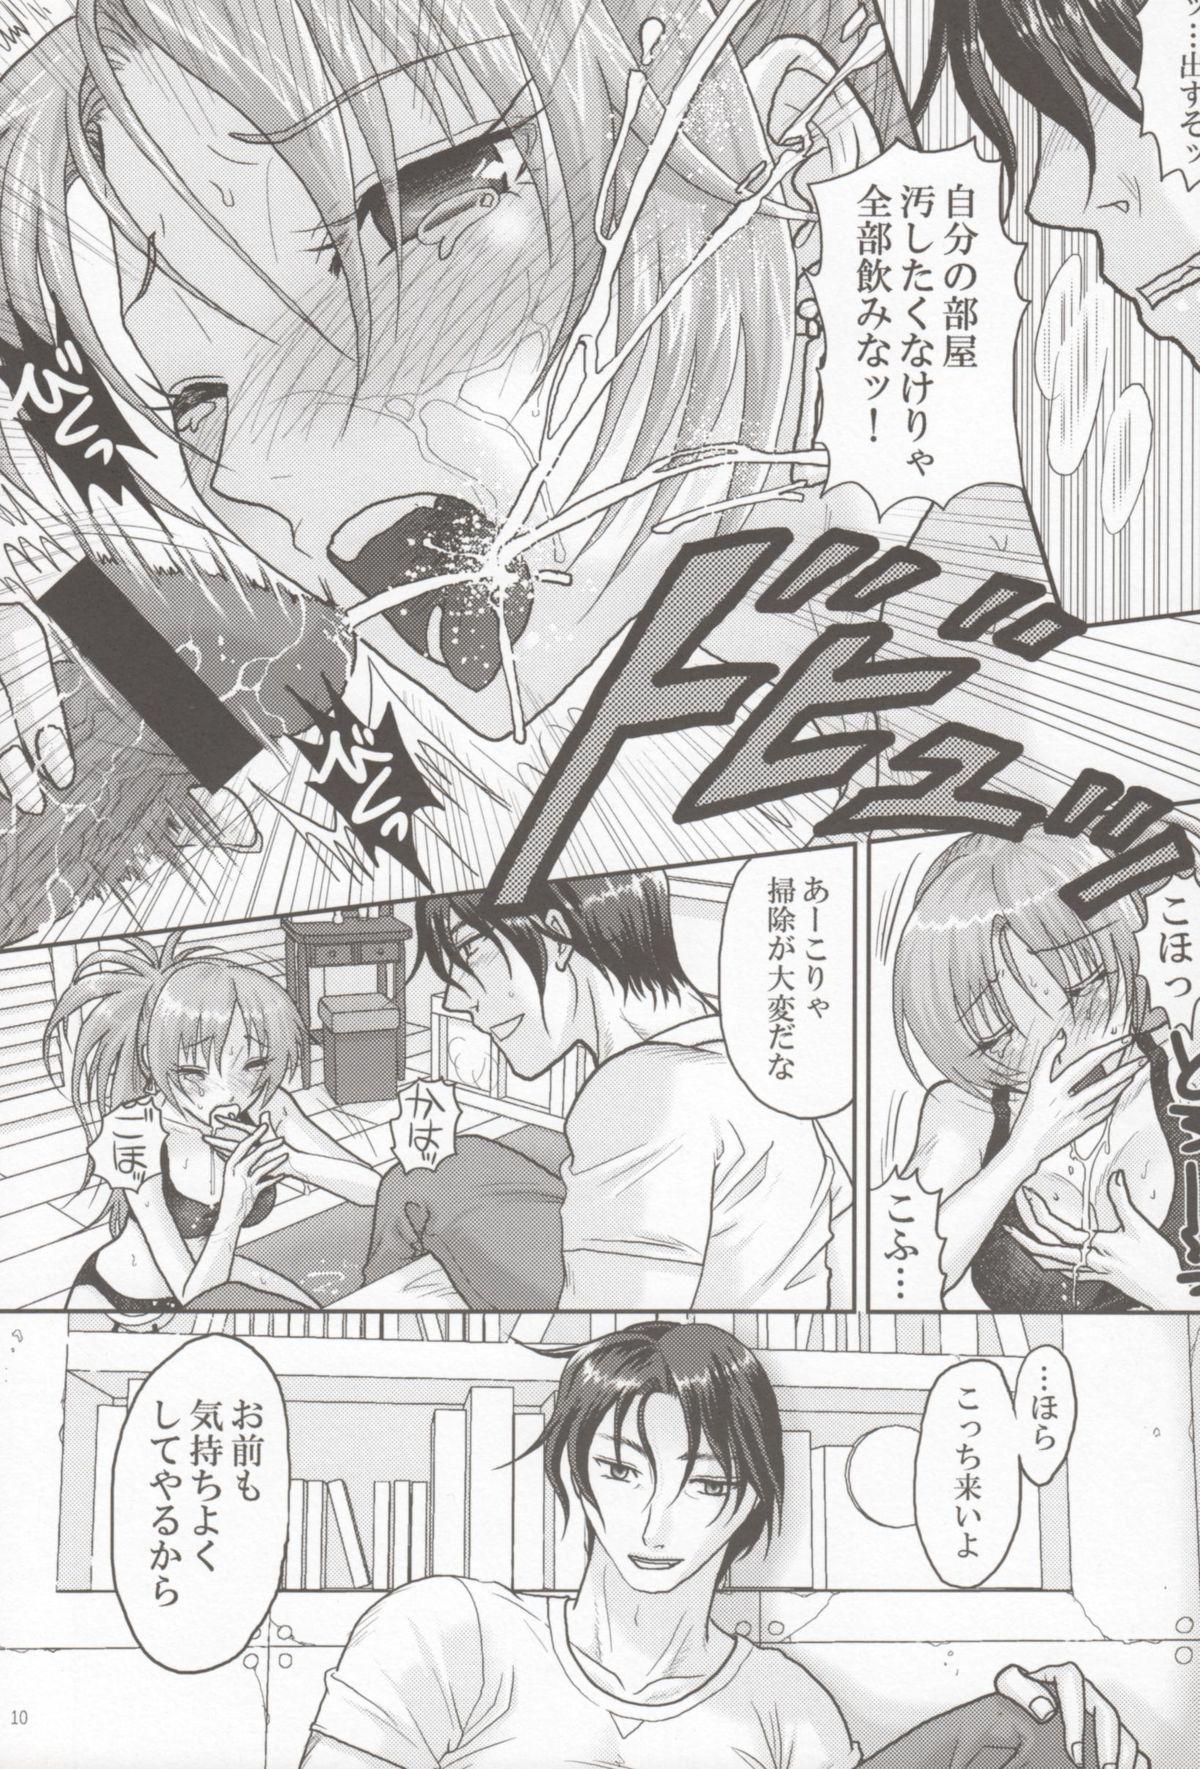 Free Teenage Porn nymphomania 5 - King of fighters Throat - Page 8